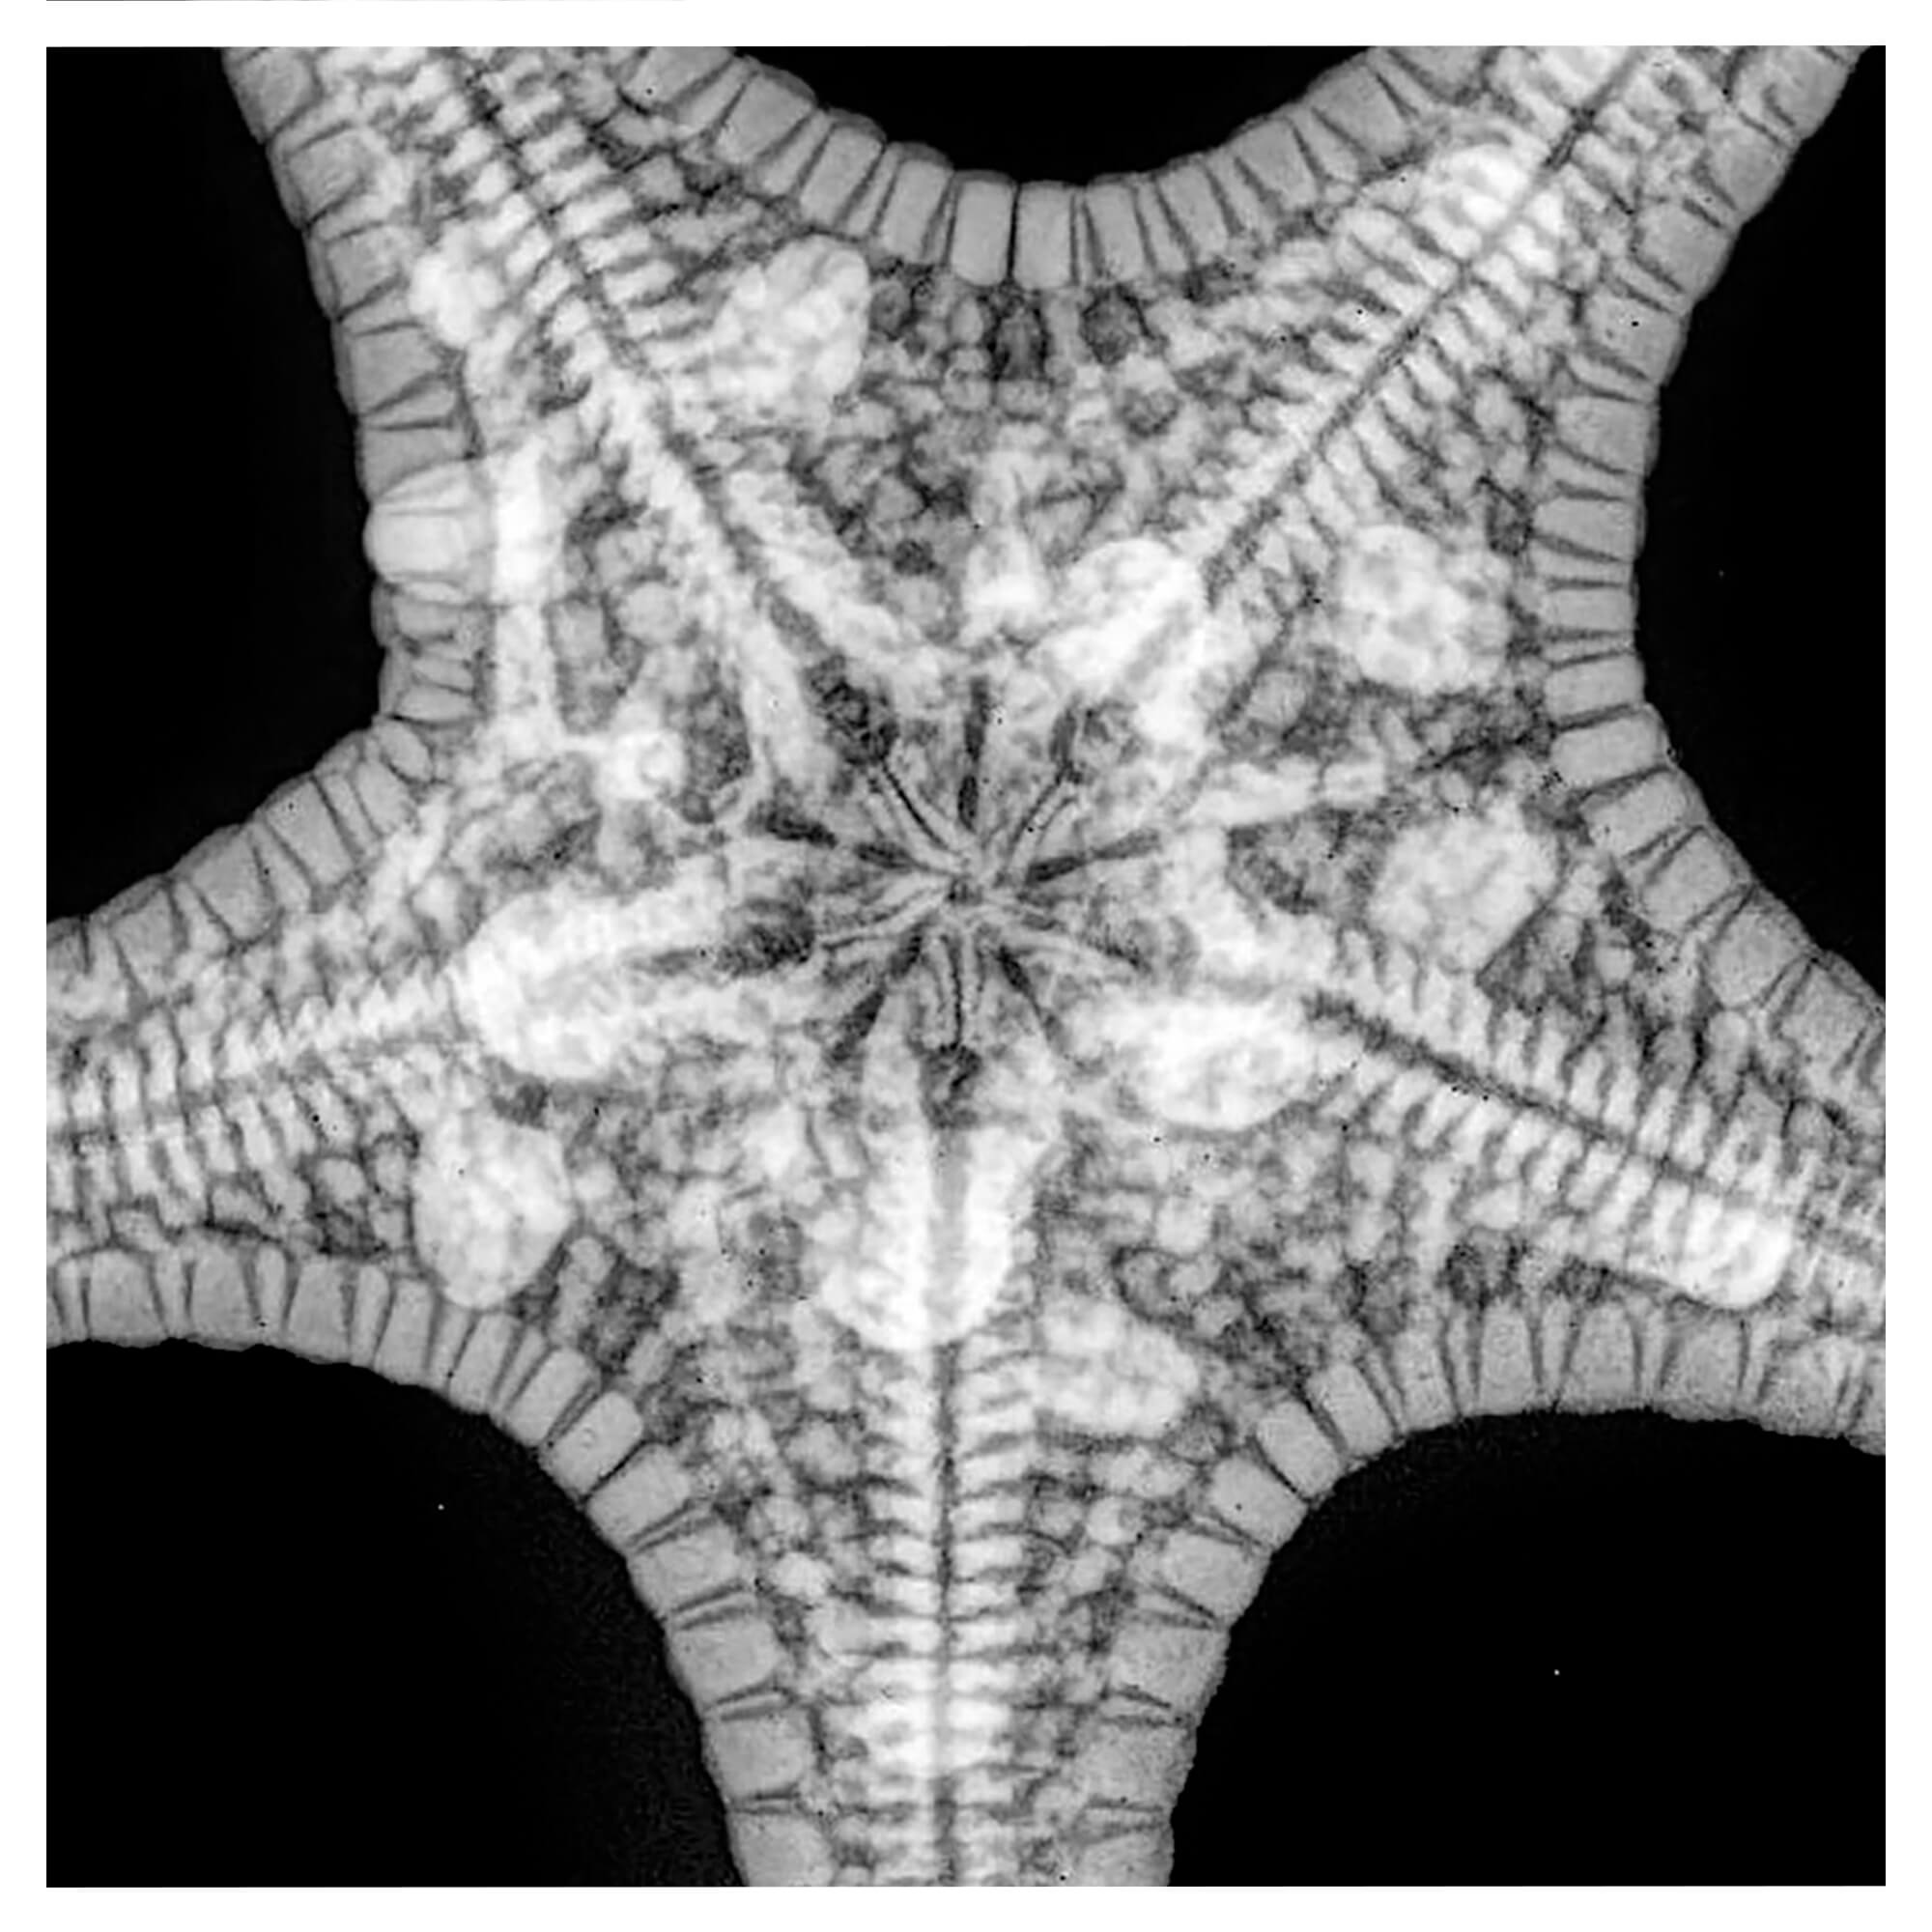 Close details taken by an X-ray technology of a star fish by Hawaii artist Michelle Smith